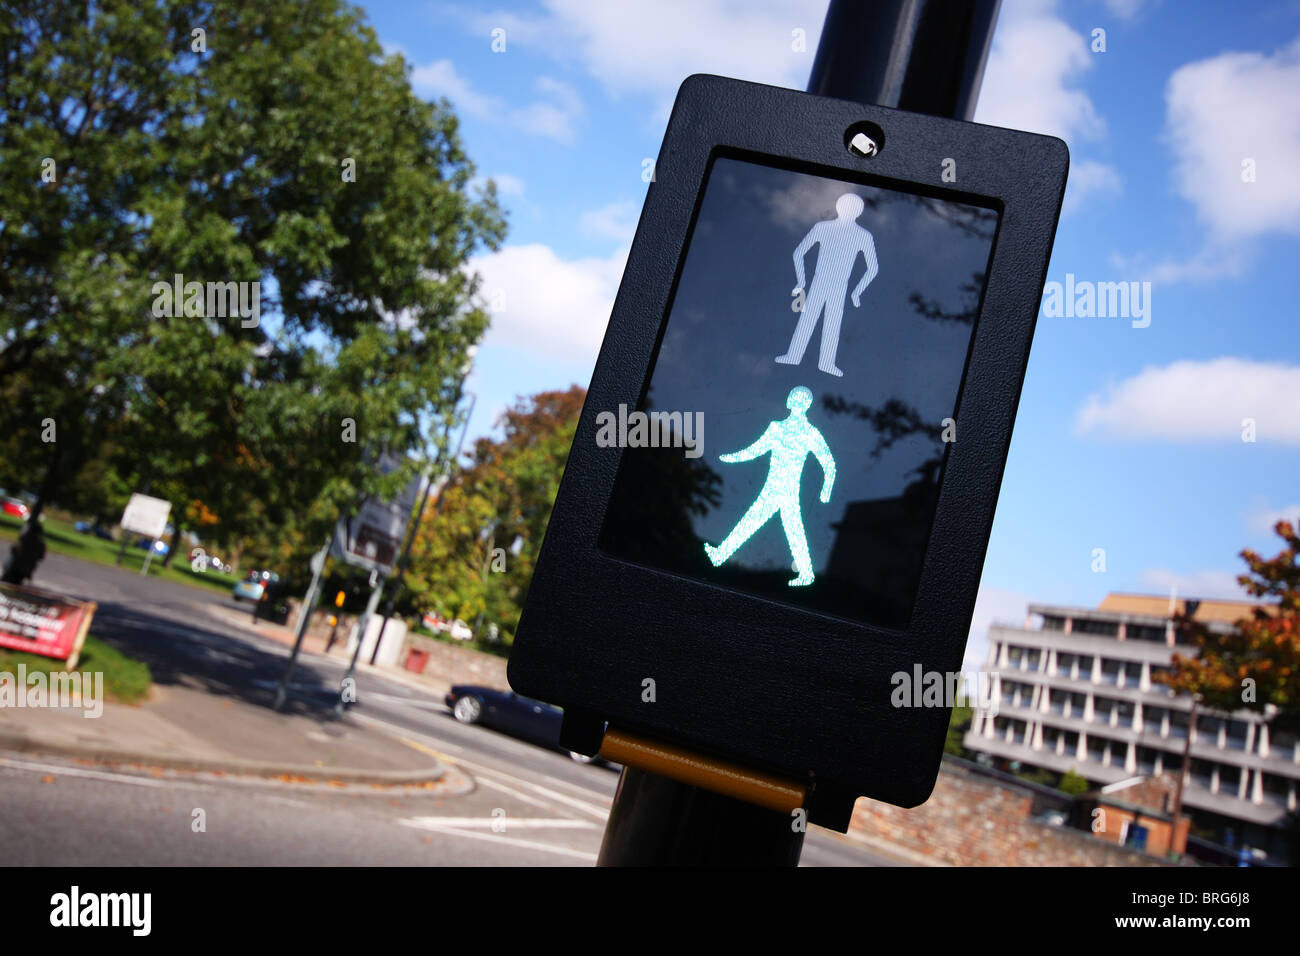 Green man lit up on at pelican pedestrian crossing Stock Photo